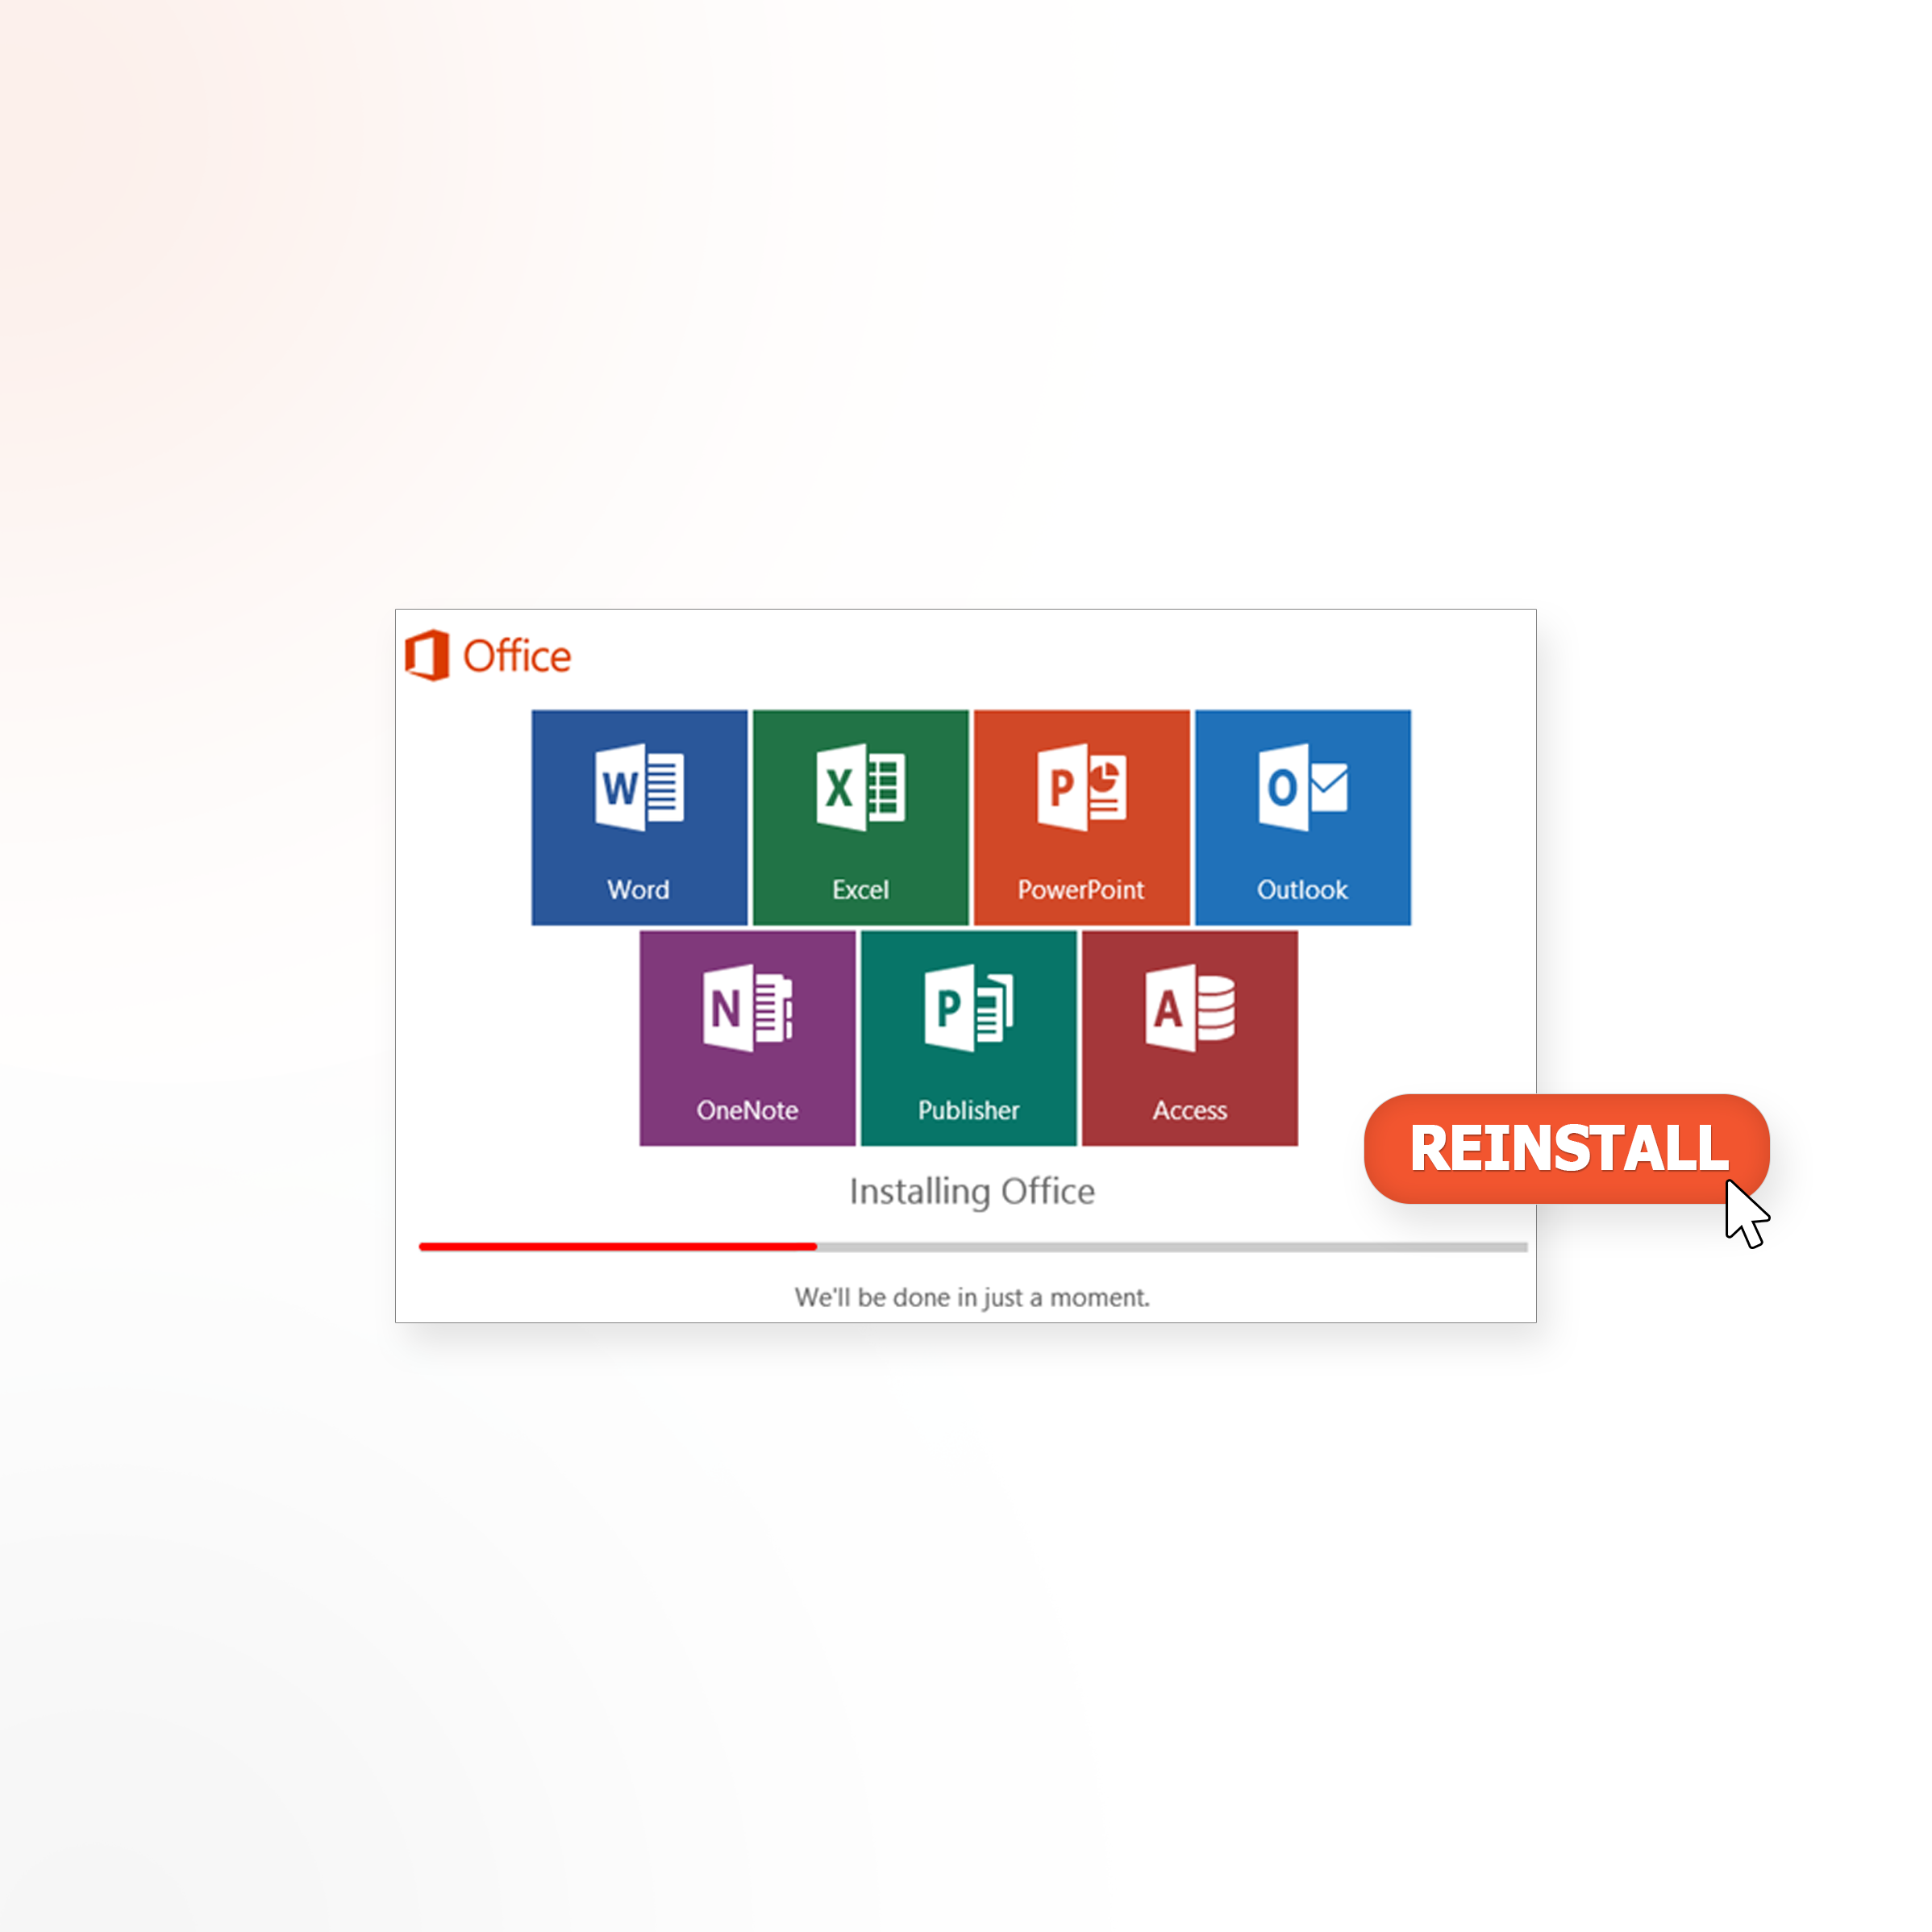 How to Reinstall Office 2016 or Office 365 on Your PC